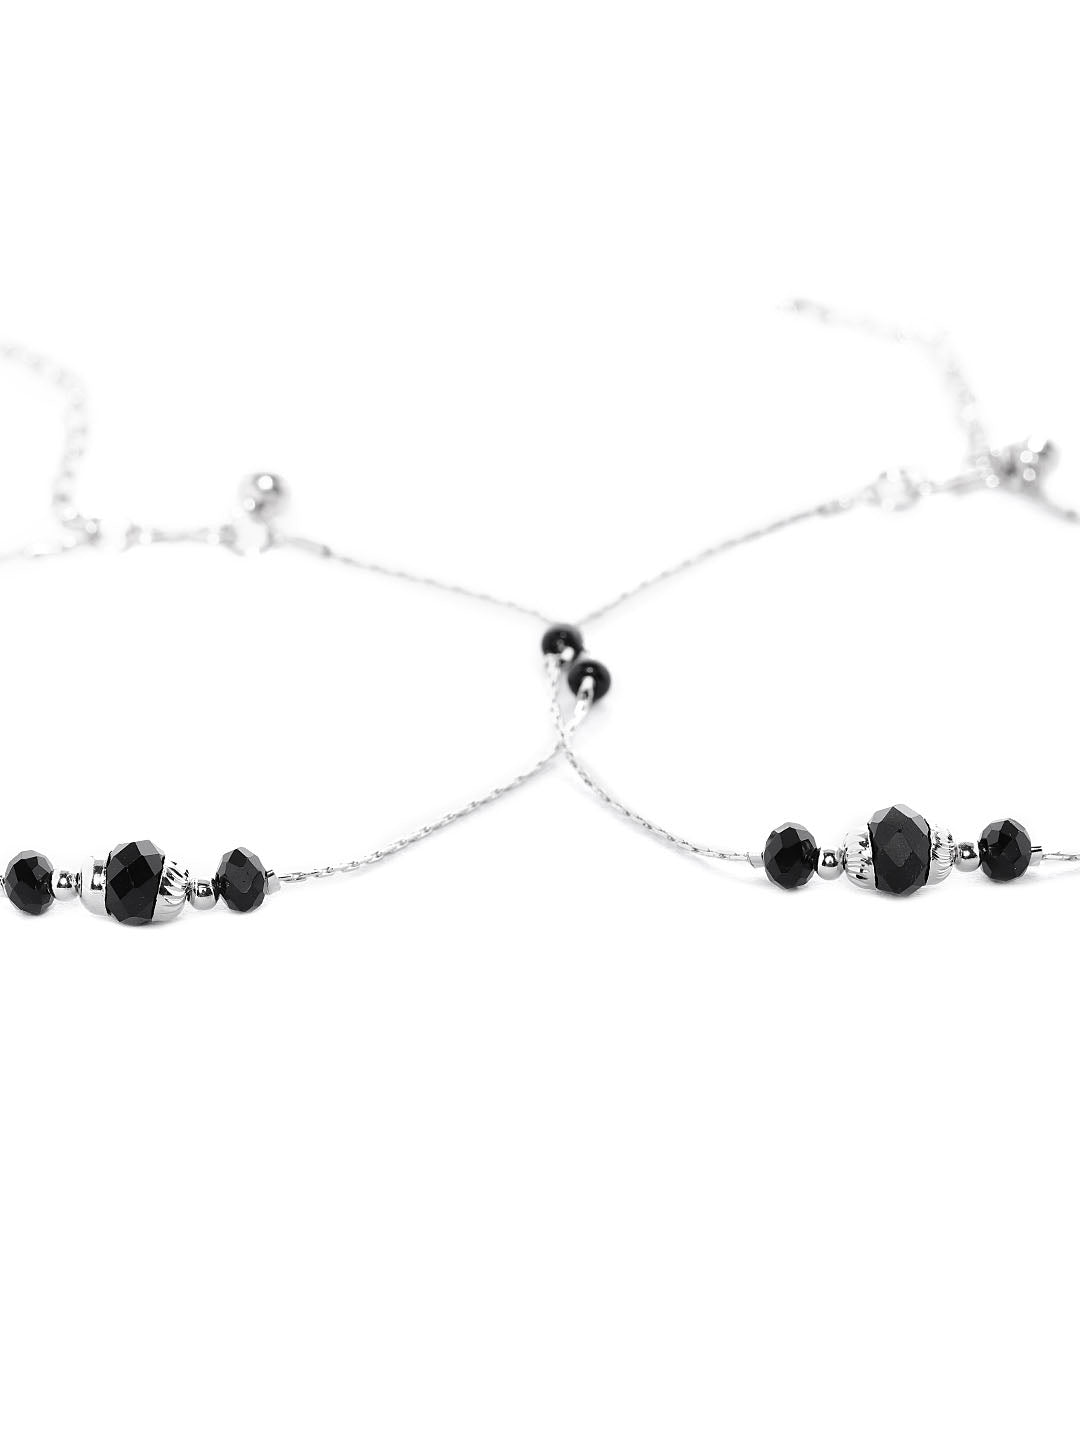 Designer Silver Plated with Black Beads StylishTrendy Fashion Anklets for Women and Girls